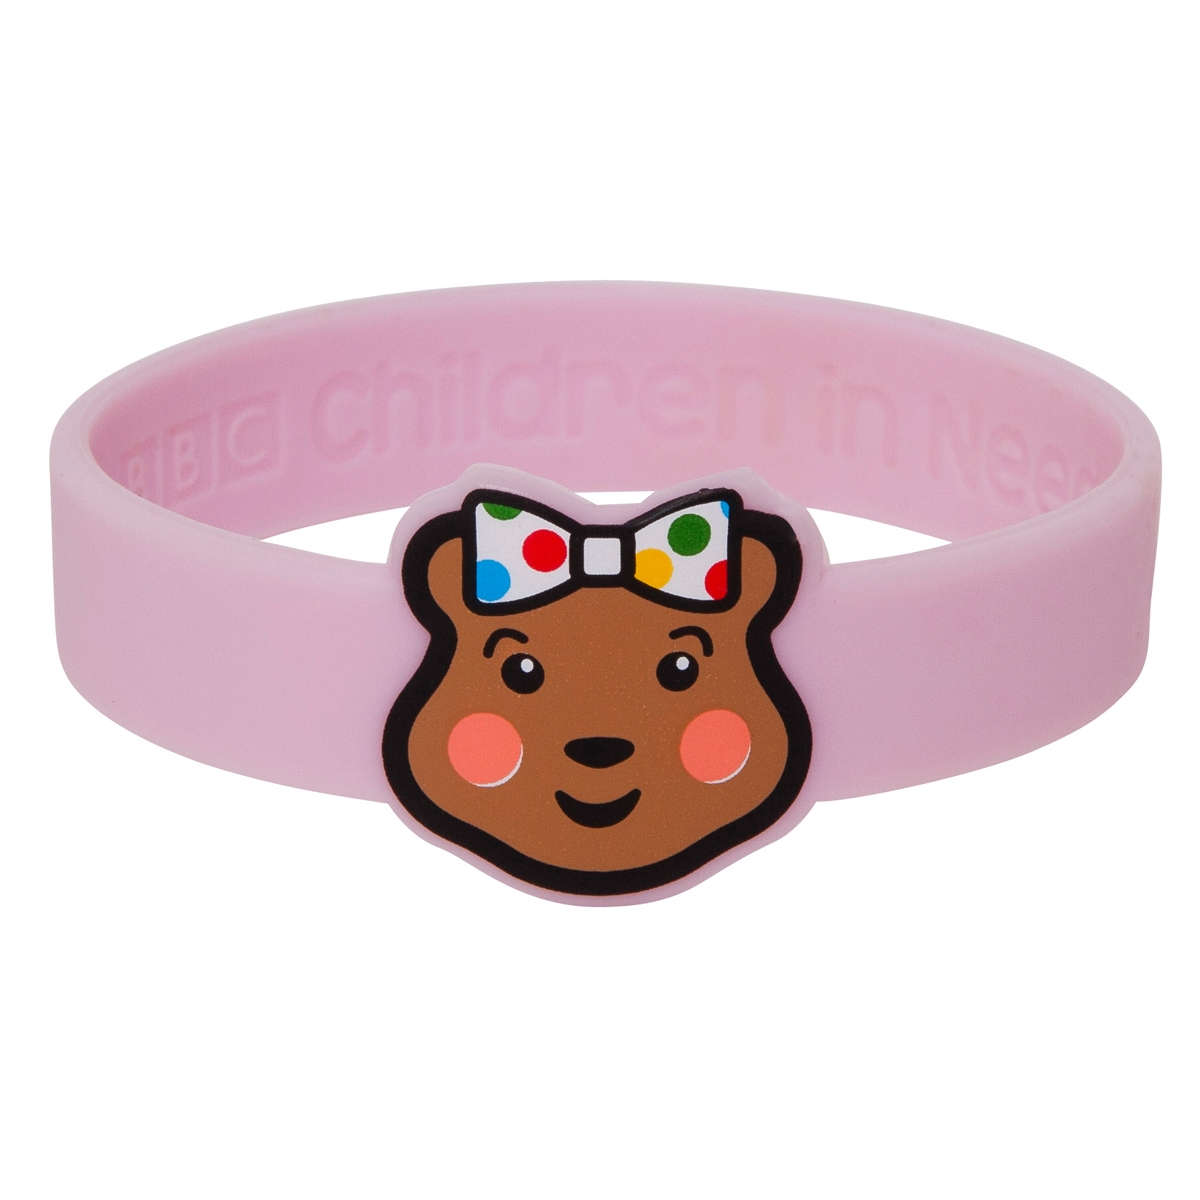 PUDSEY & BLUSH WRISTBANDS - BBC Children in Need